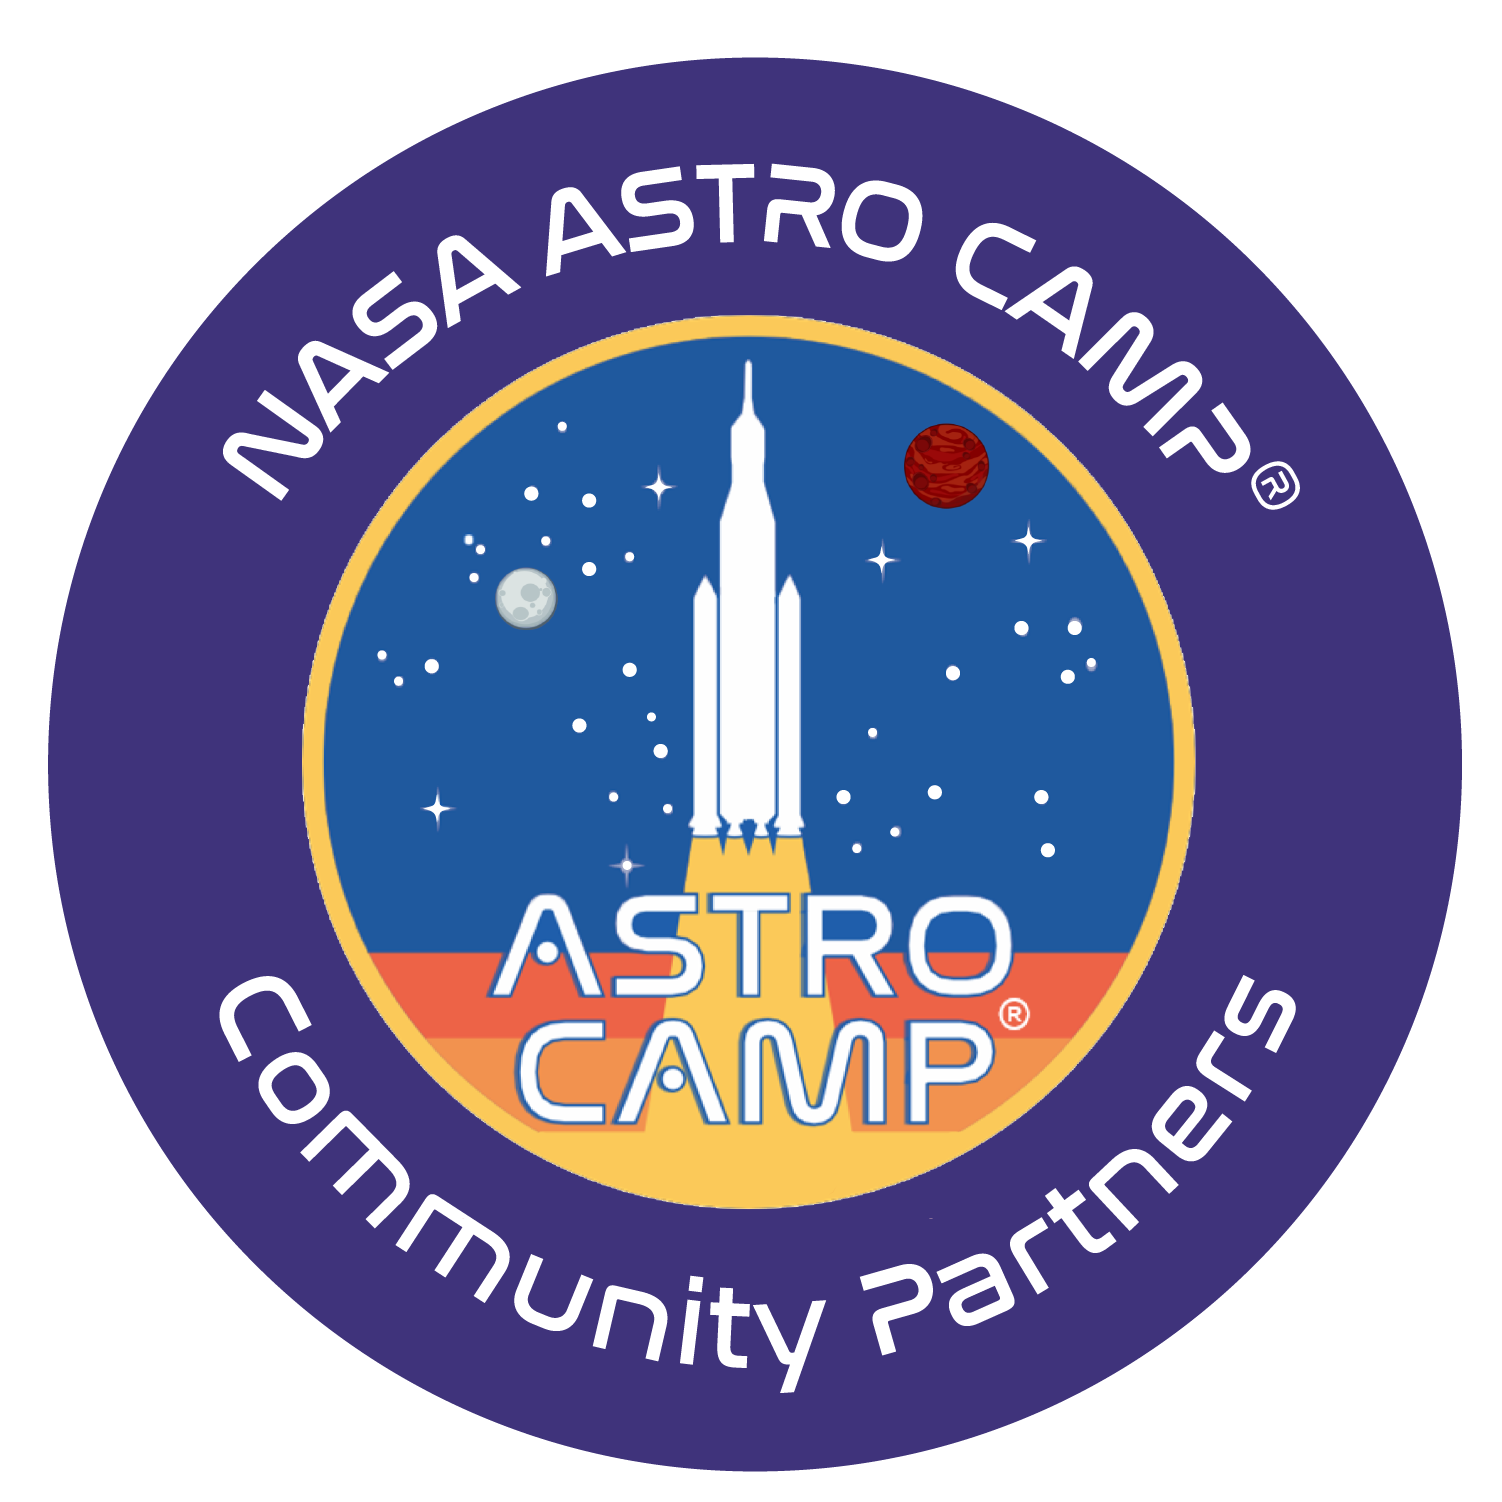 NASA ACCP mission patch depicting a rocket with the words ASTRO CAMP in a circle. A purple circle borders it that says